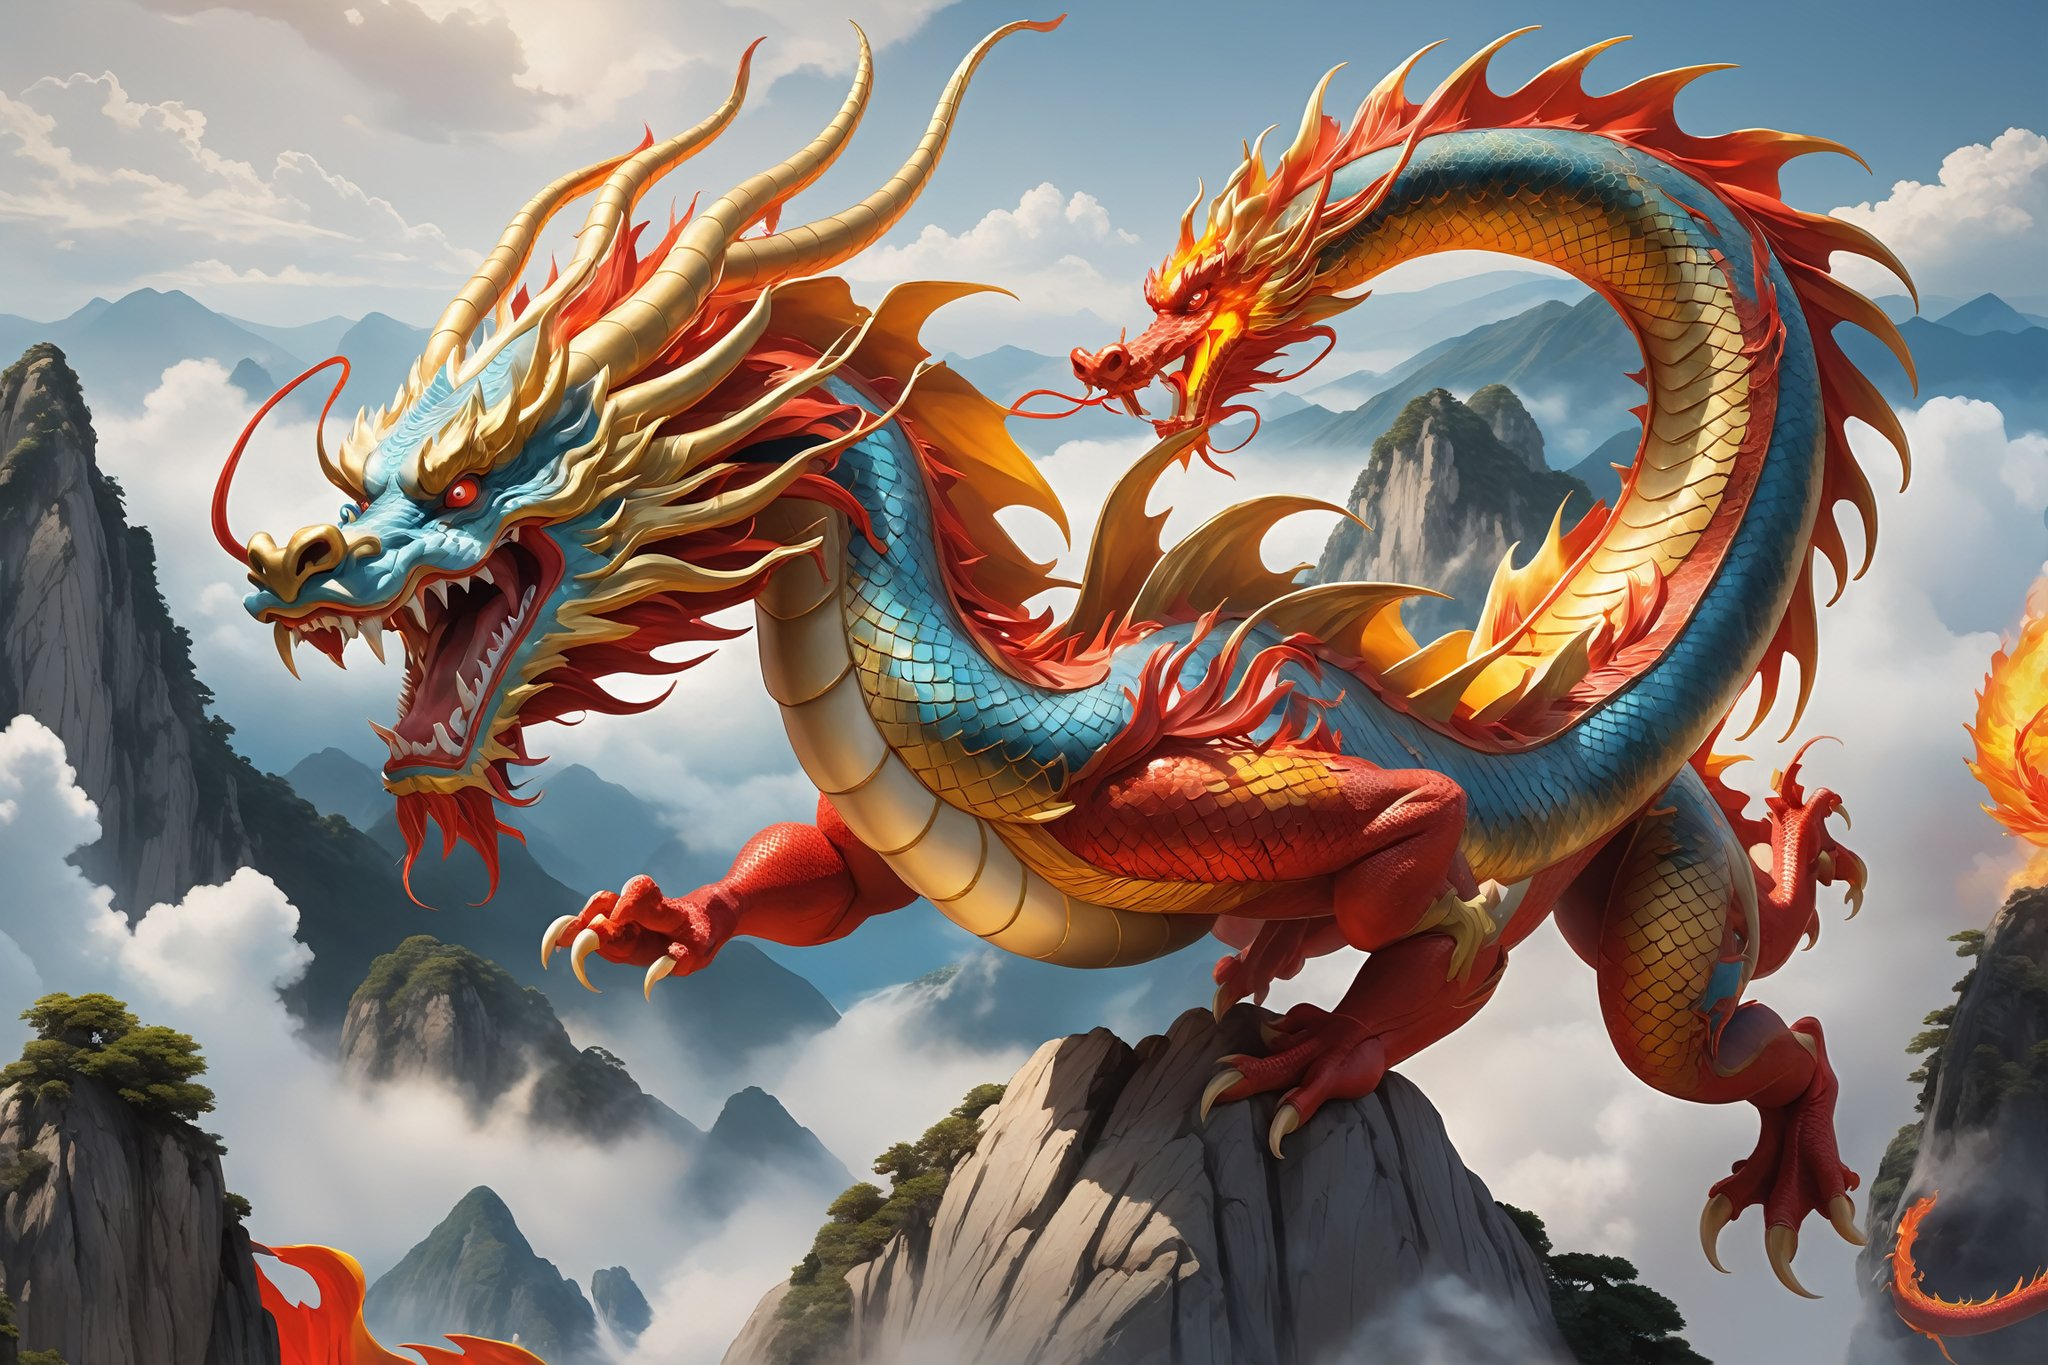 masterpiece, top quality, detailed character design, ultra-high res, UHD, full body illustration of a Chinese dragon, its scales shimmering in hues of red and gold, it soars through the clouds, breathing fire from its open jaws, graceful lines, perfect form, dynamic pose, vibrant, action-packed, embodying the spirit of the wild, epic, mythical, anime style, 2d